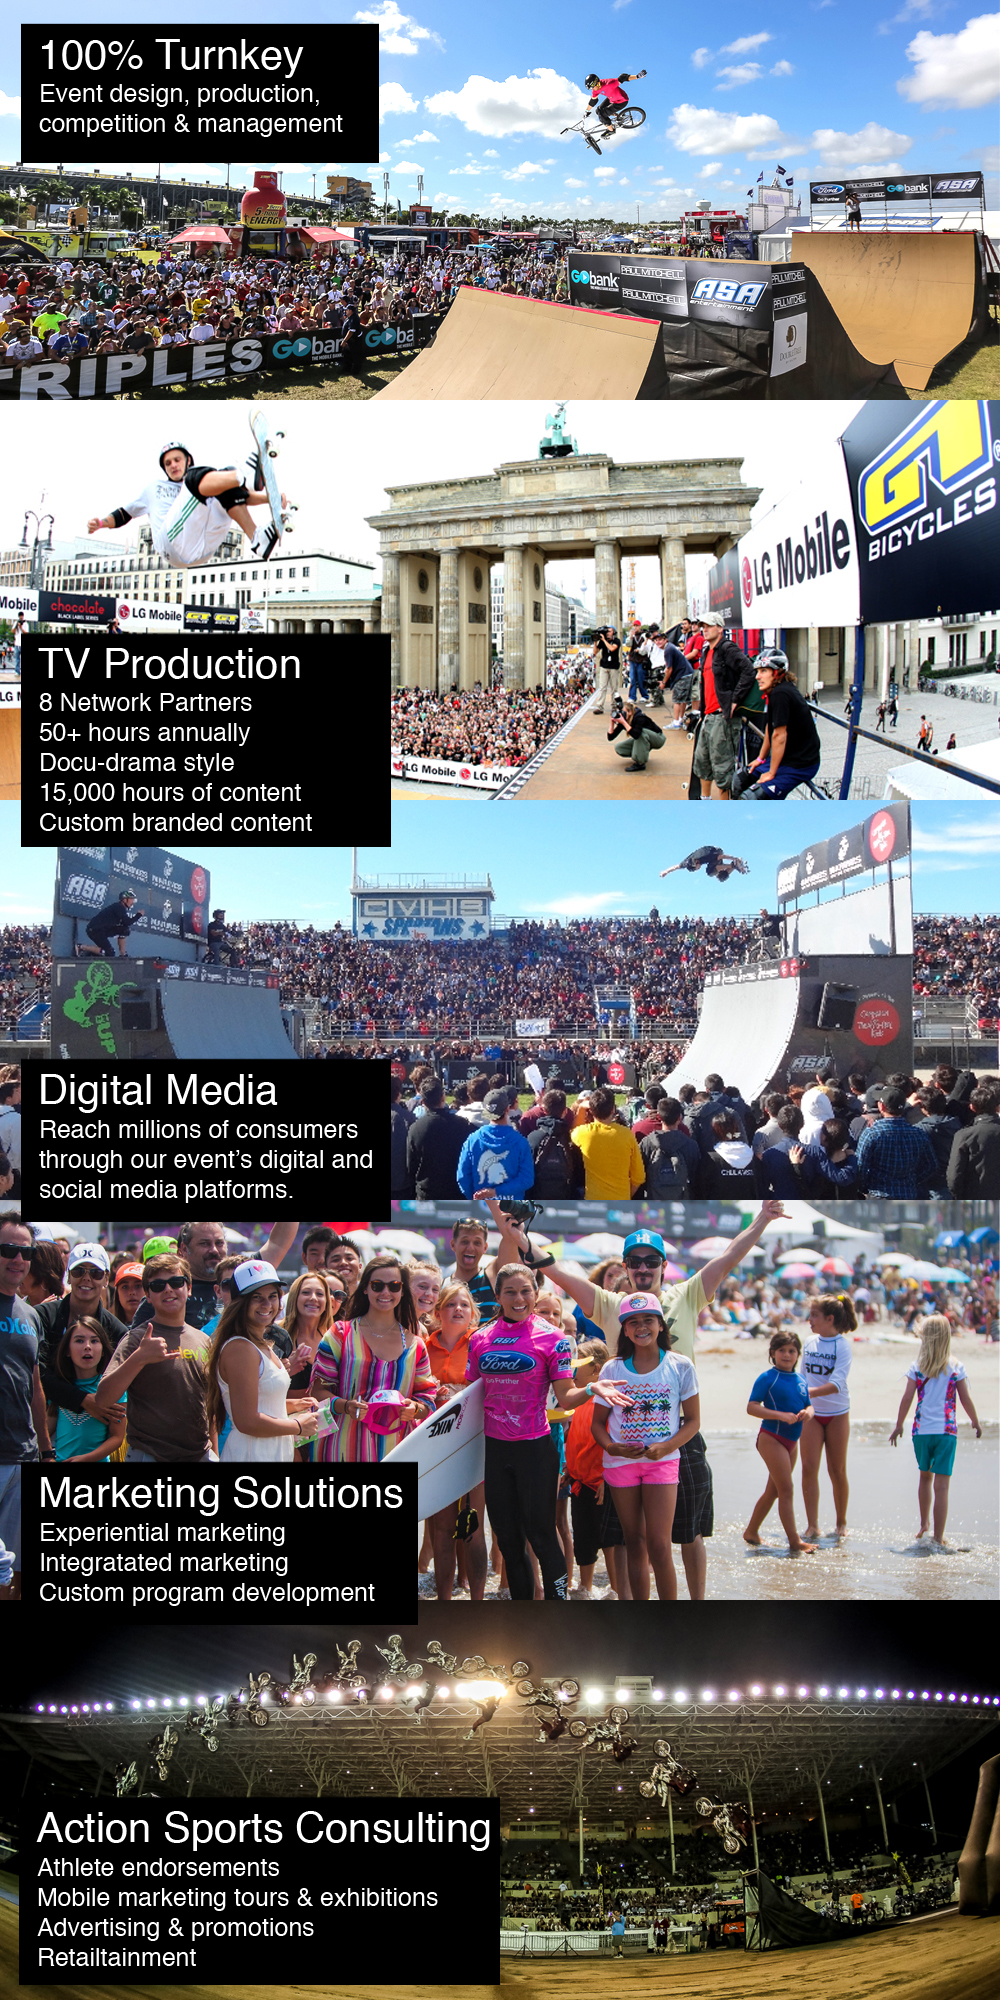 action sports events